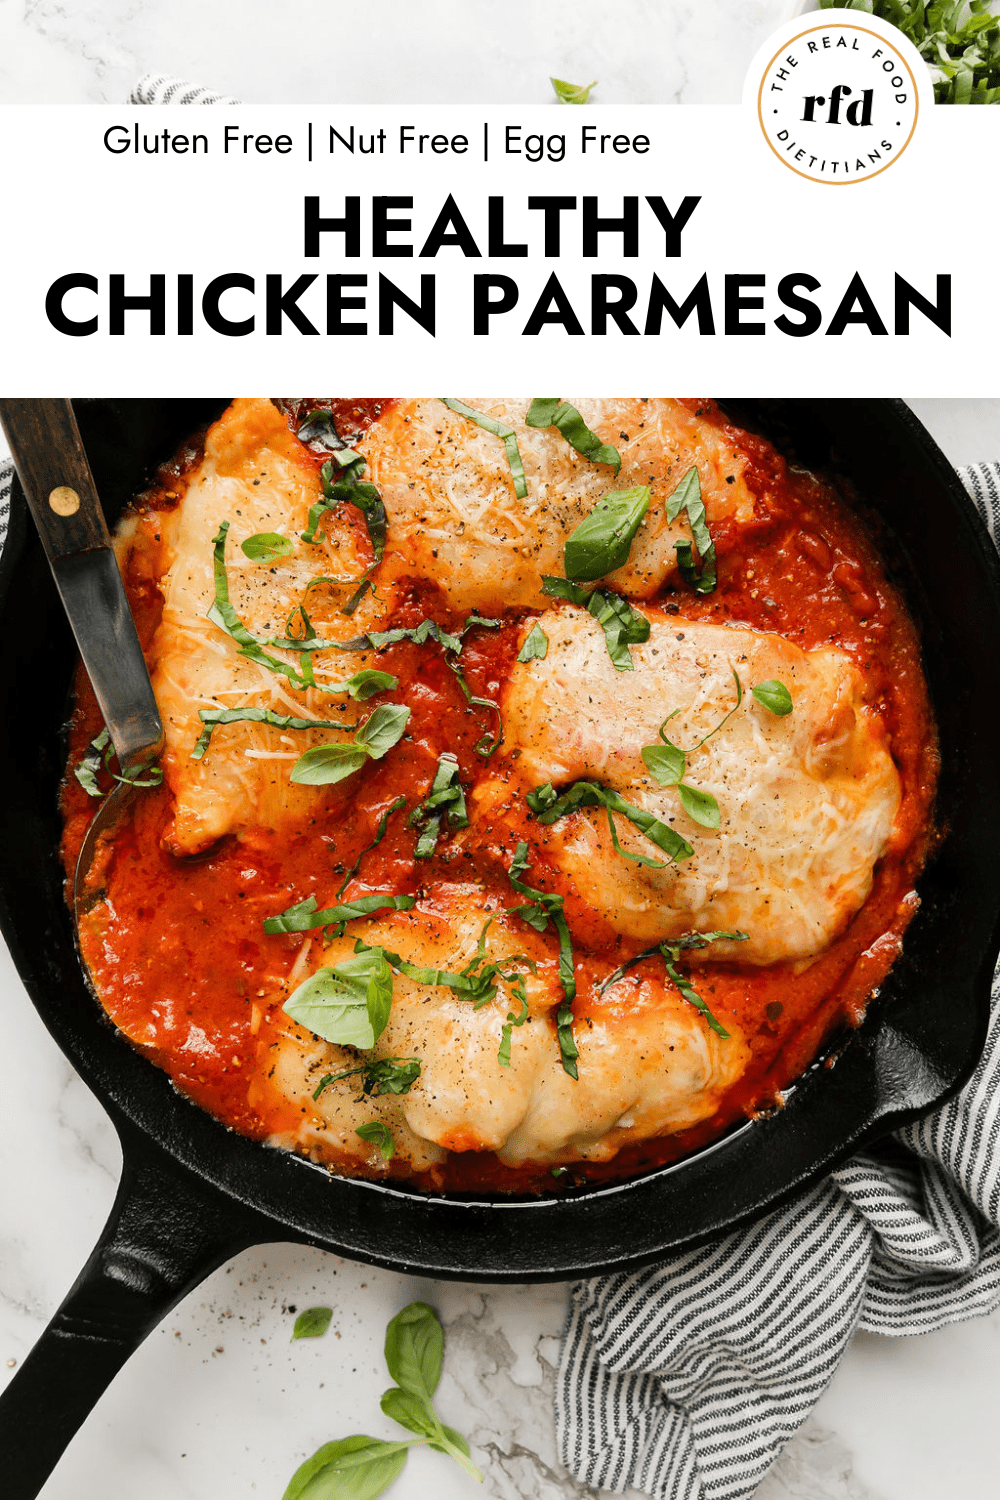 https://therealfooddietitians.com/wp-content/uploads/2019/03/Healthy-Chicken-Parmesan-1000-%C3%97-1500-px.png